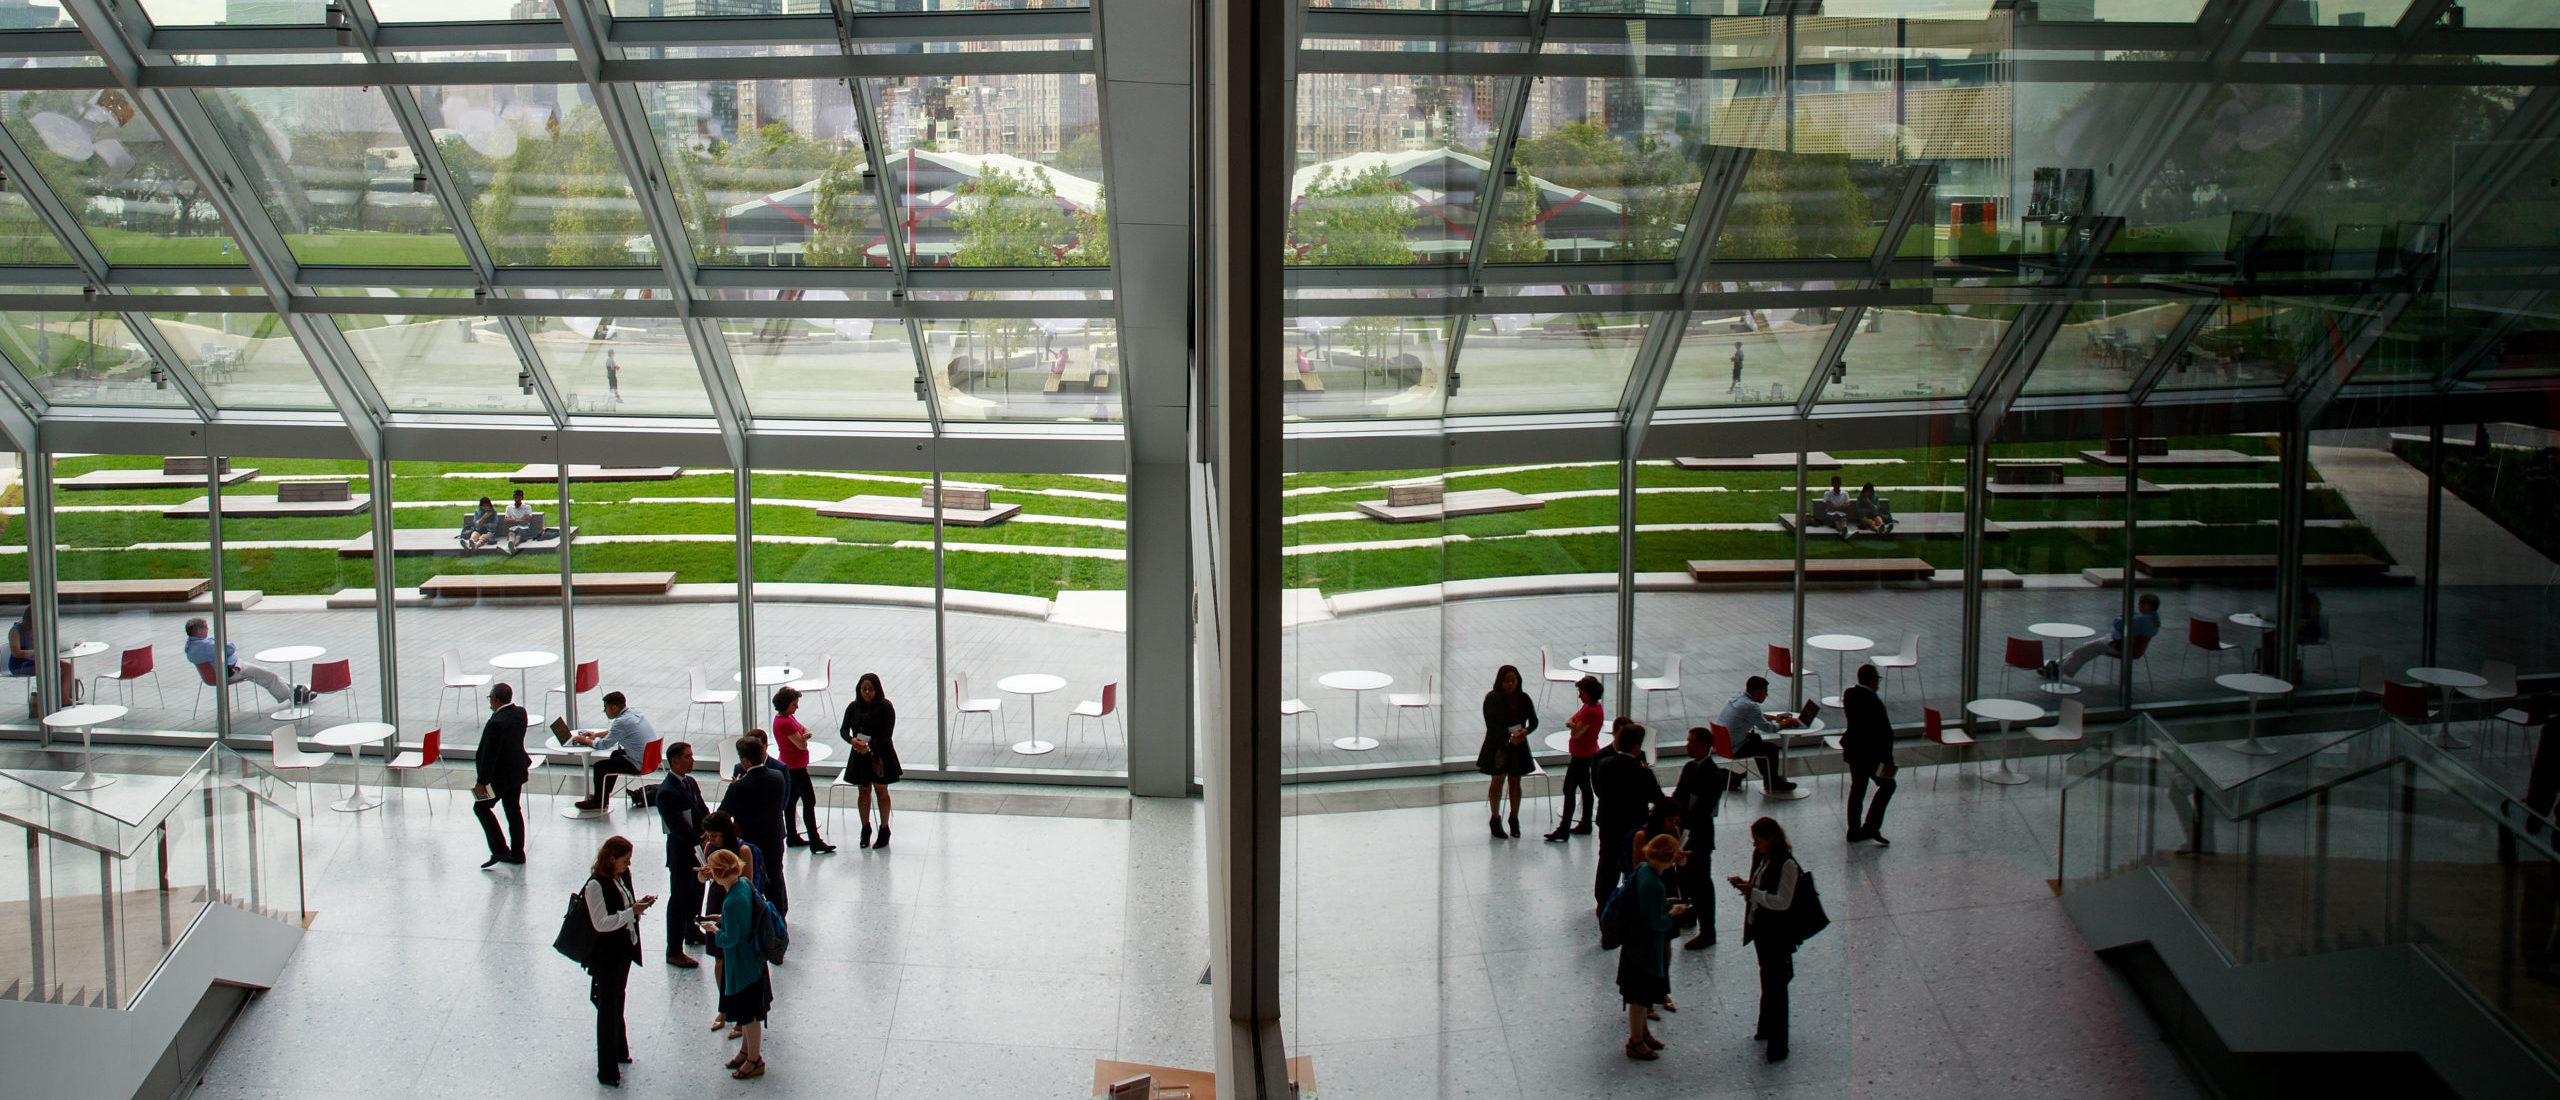 NEW YORK, NY - SEPTEMBER 13: A view of the lobby of 'The Bridge' building on the new campus of Cornell Tech on Roosevelt Island, September 13, 2017 in New York City. Seven years ago, former New York City Mayor Michael Bloomberg created a competition that invited top universities to open an applied-science campus in New York City. Cornell Tech, an engineering and science campus of Cornell University, officially opened its doors on Wednesday. (Photo by Drew Angerer/Getty Images)